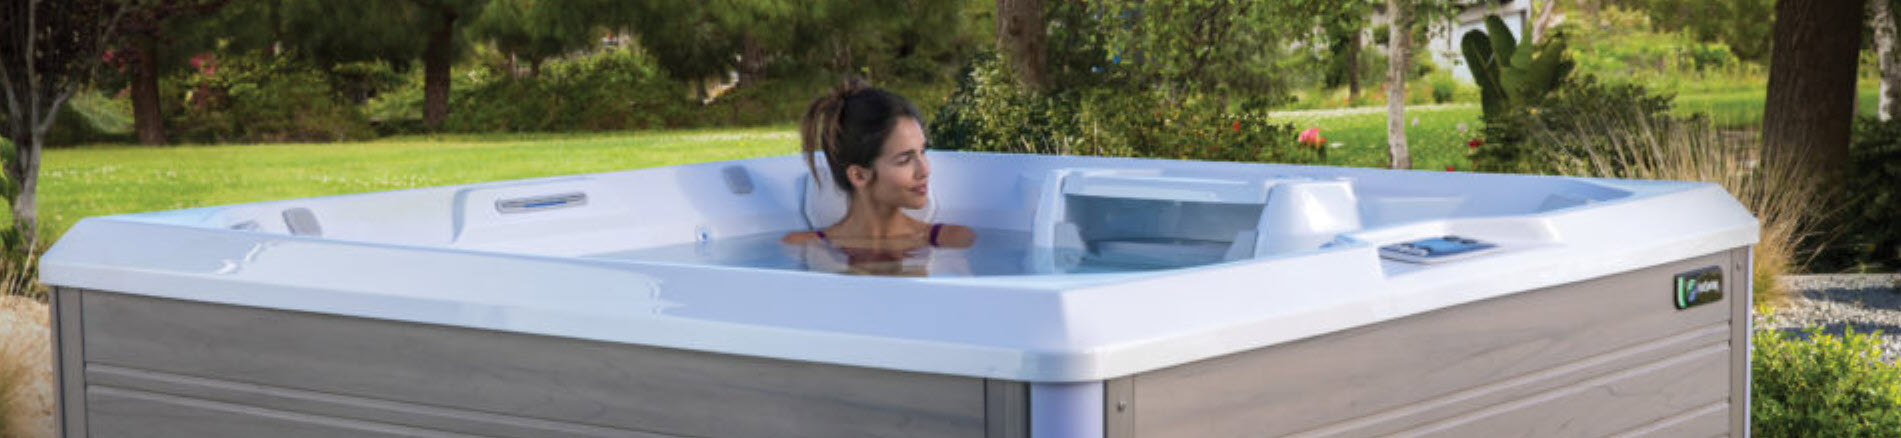 Manage Everyday Stress With a Spa at Home, Backyard Hot Tubs Madison